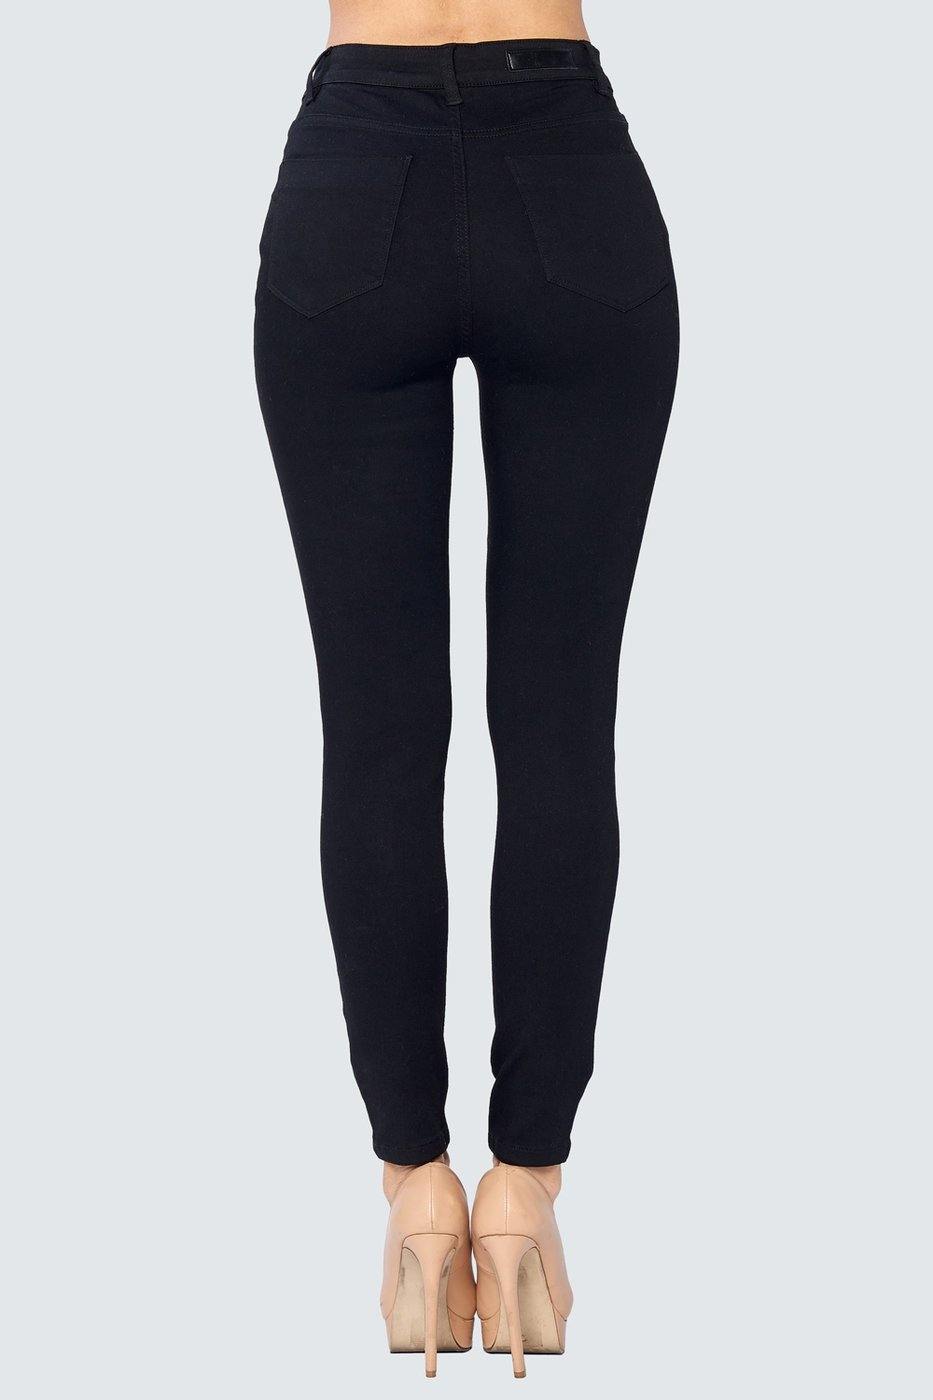 Black High Waisted Jeans – She's Bae Boutique